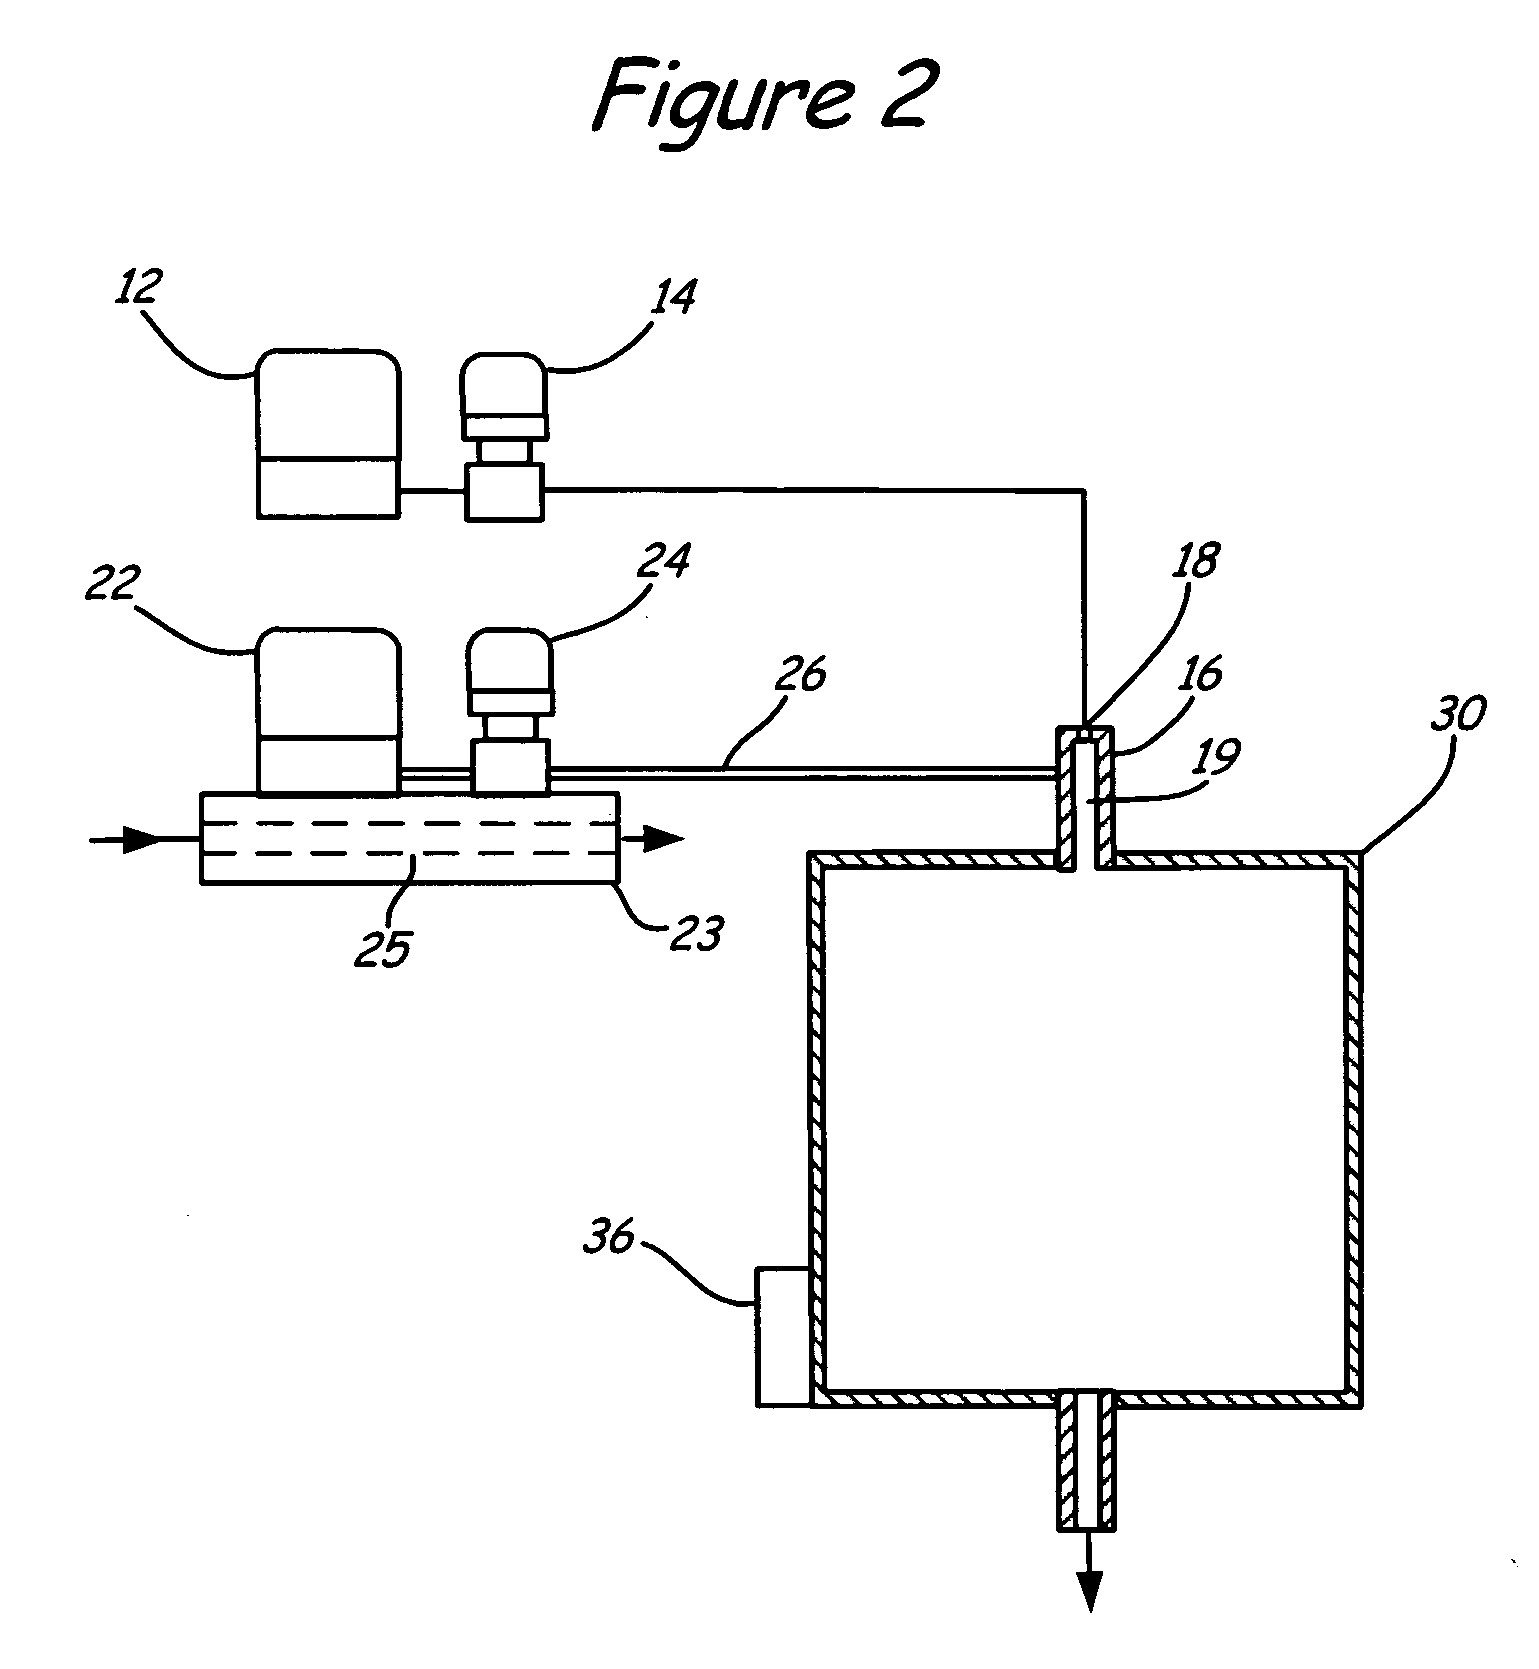 High accuracy vapor generation and delivery for thin film deposition